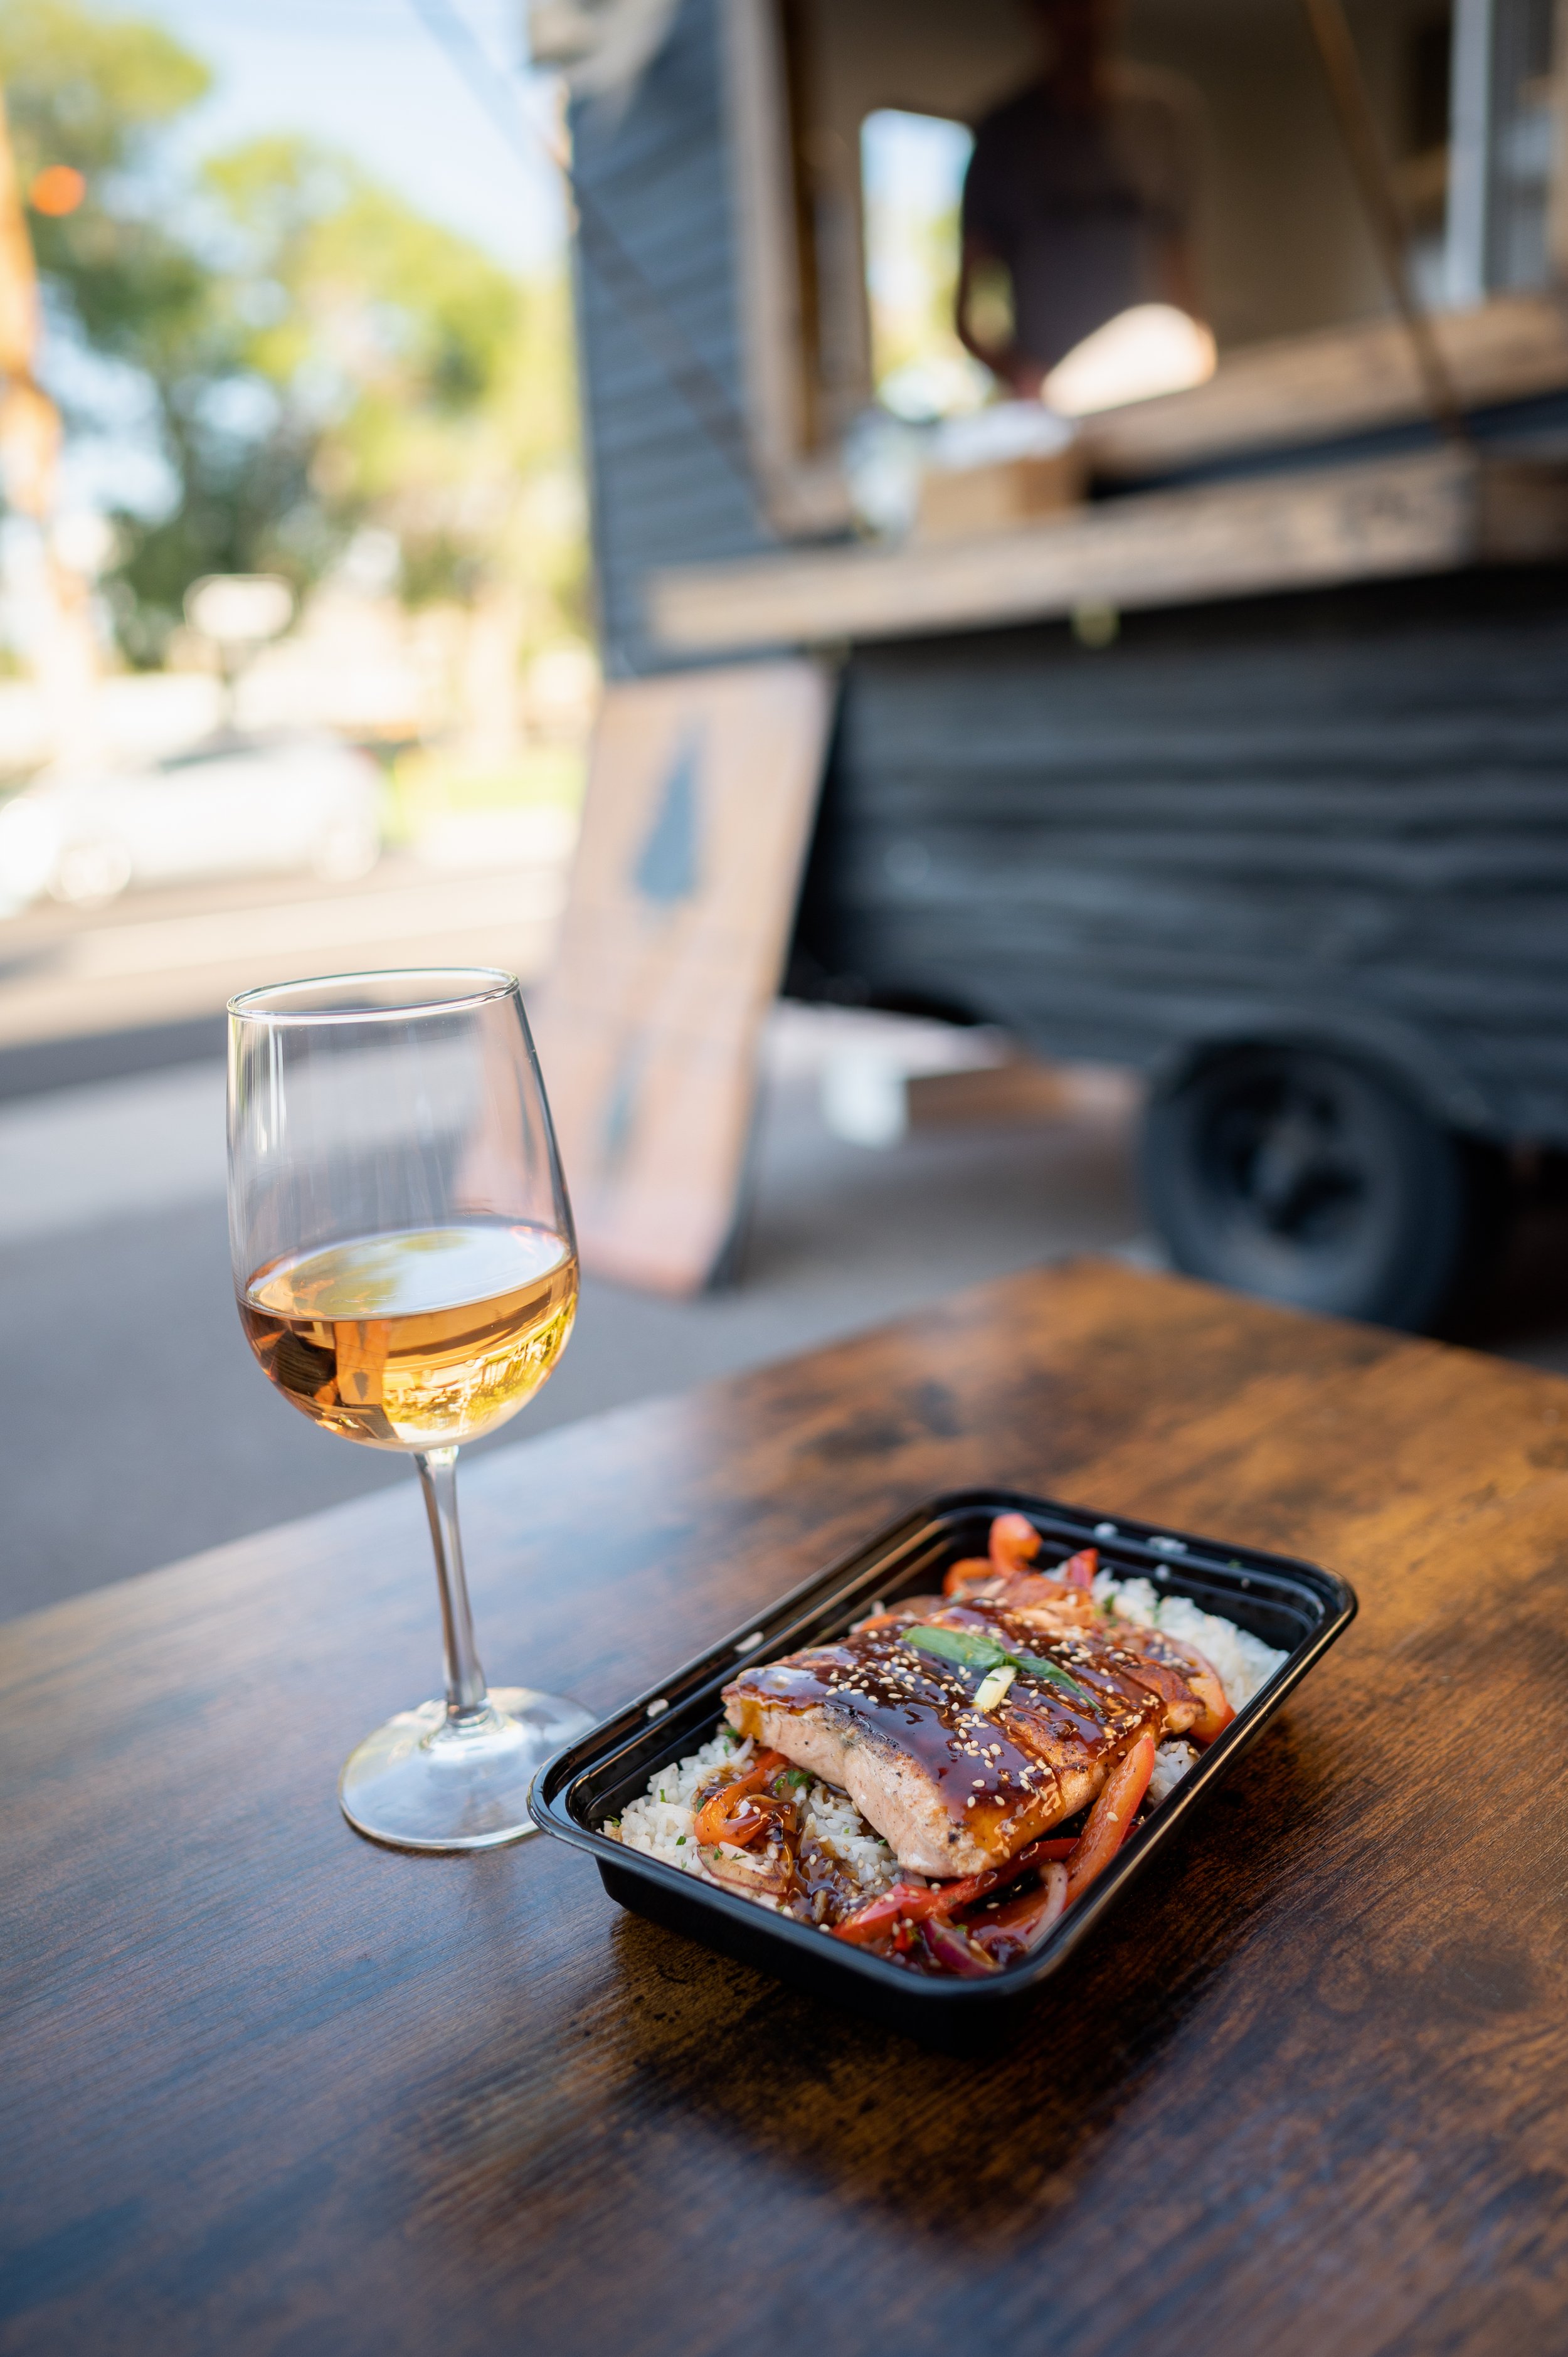 The teriyaki salmon bowl from Thrive with a glass of rose from Brick 243.